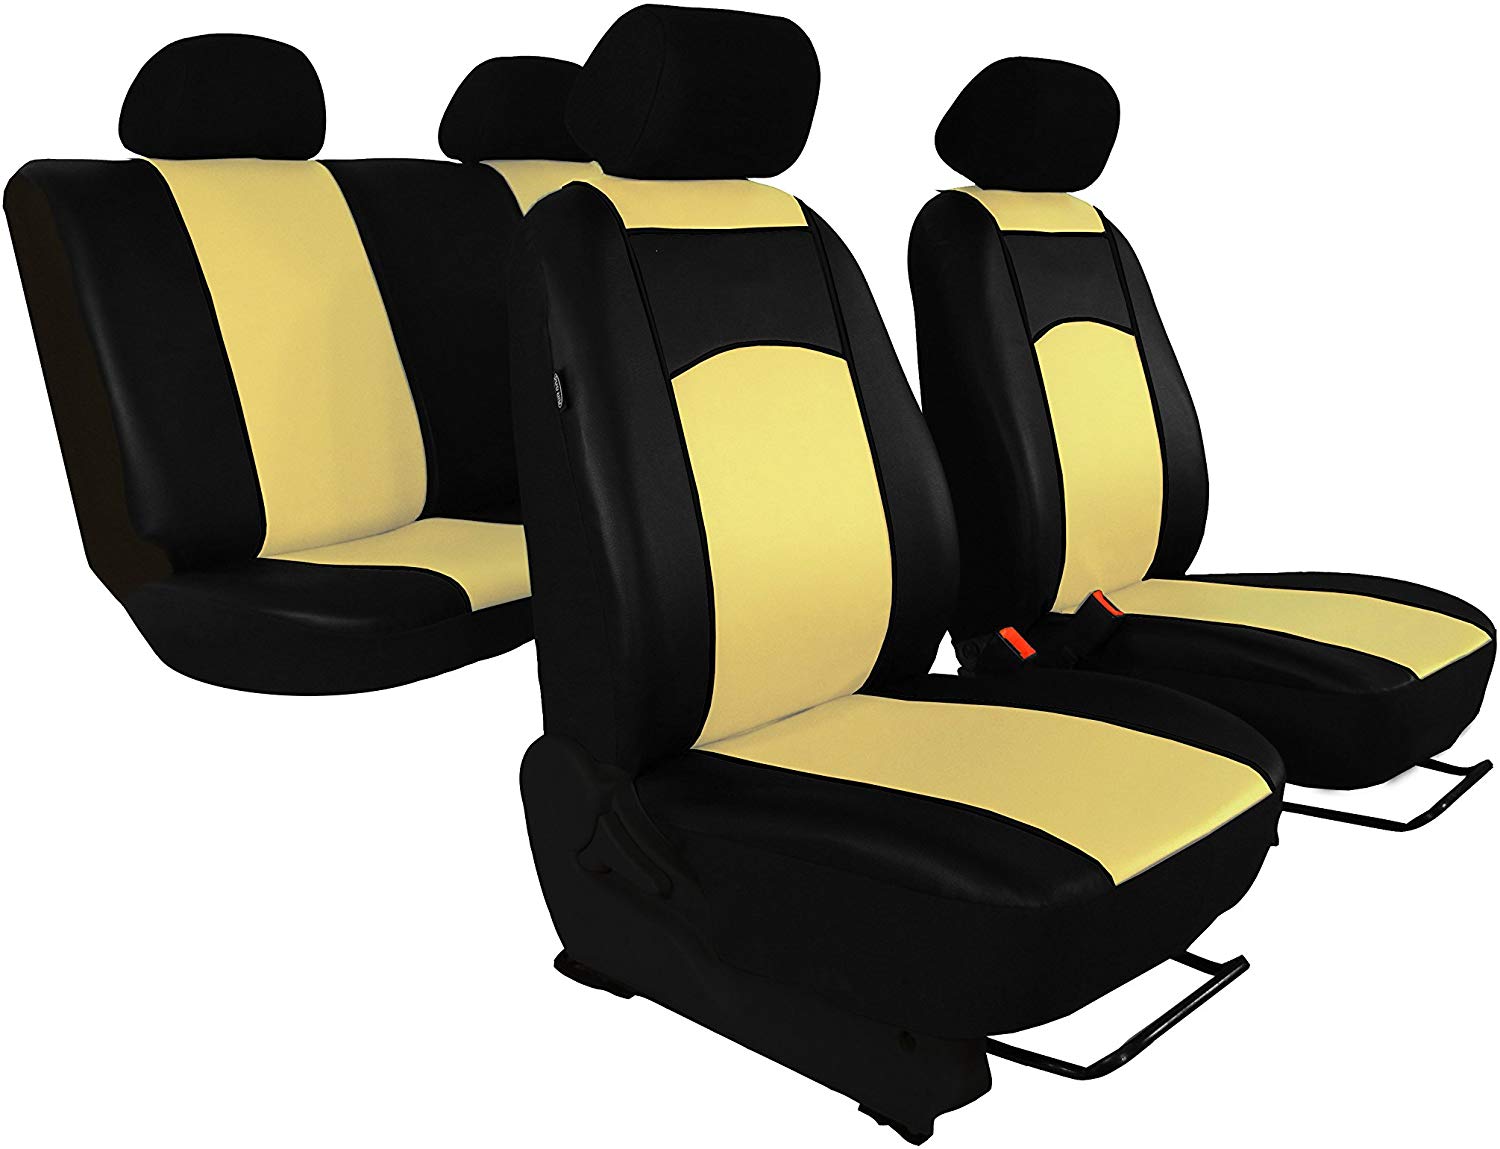 Eco Leather Seat Covers 7 Colors for Renault Clio 1998 to 2014